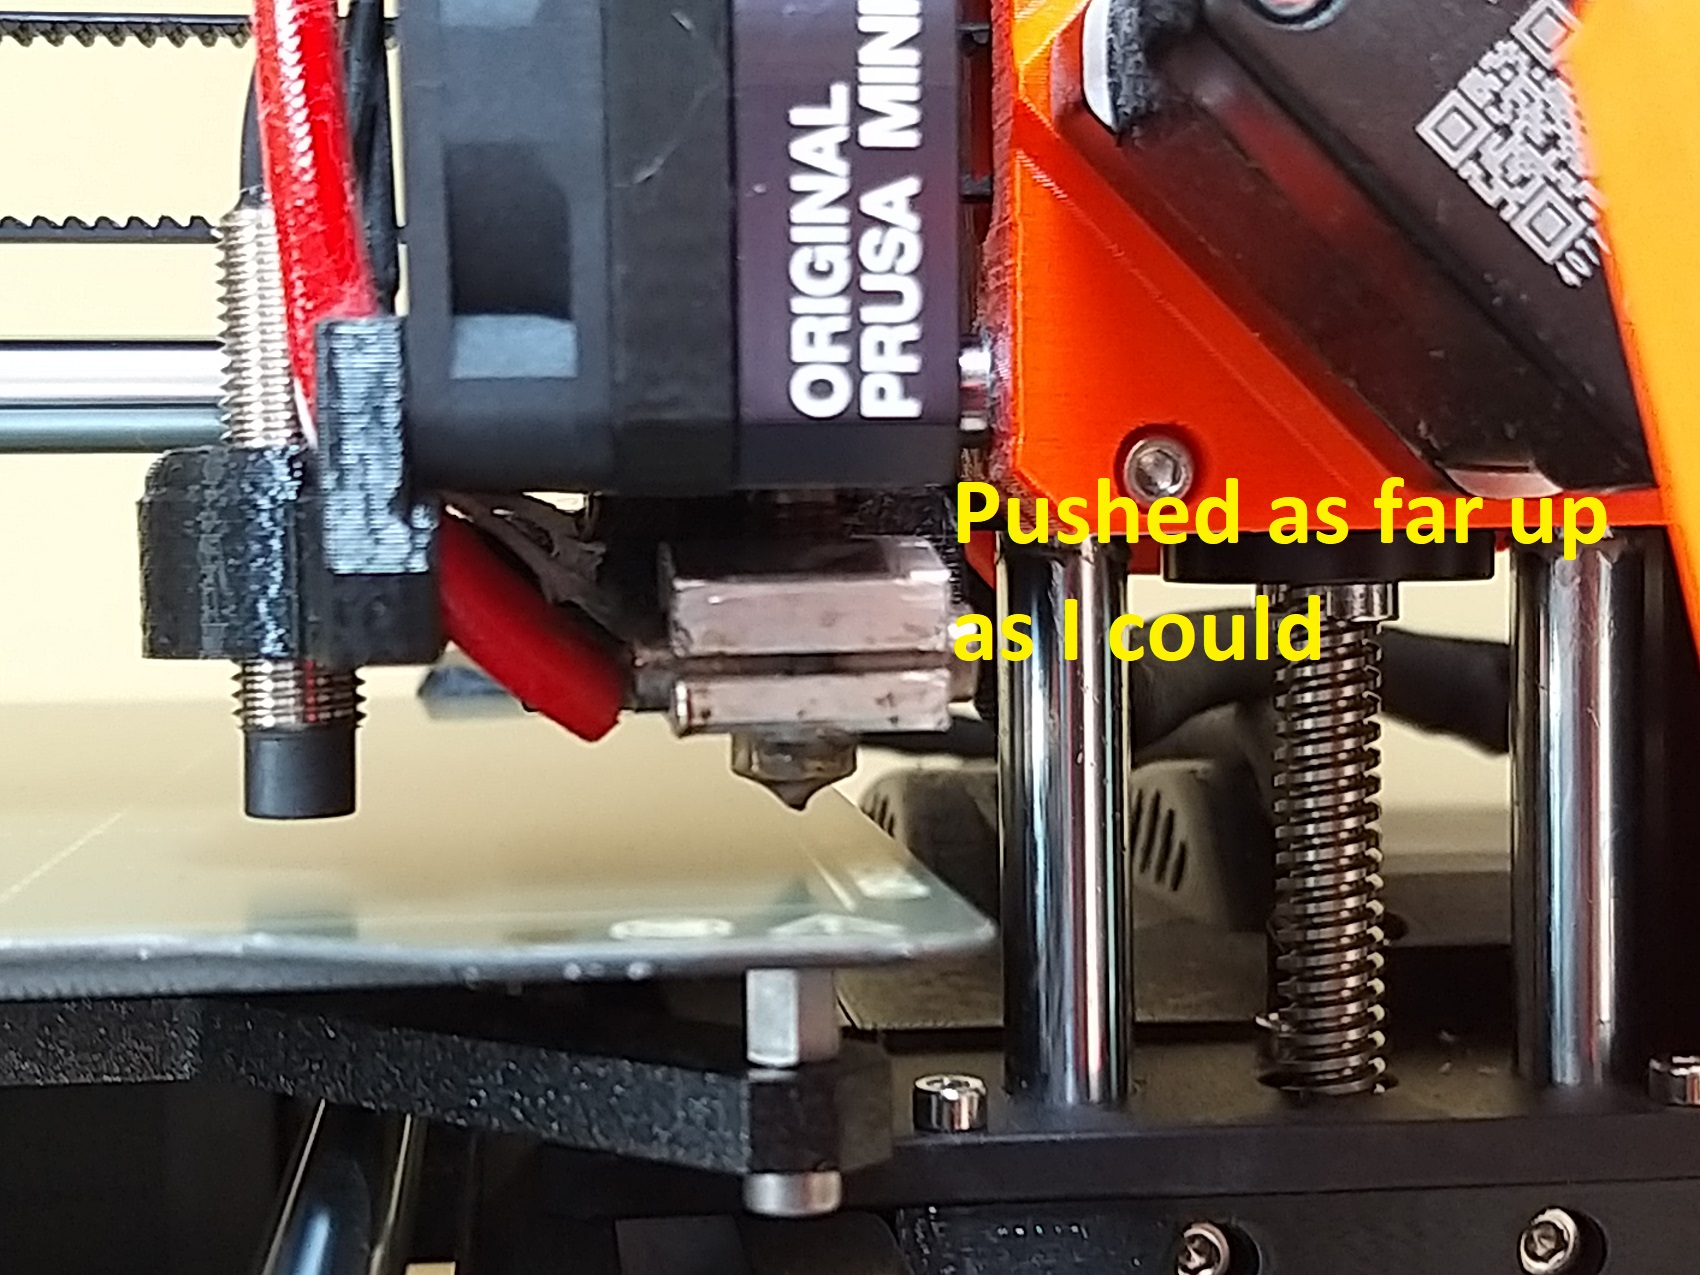 Do I have too much lubricant? : r/prusa3d